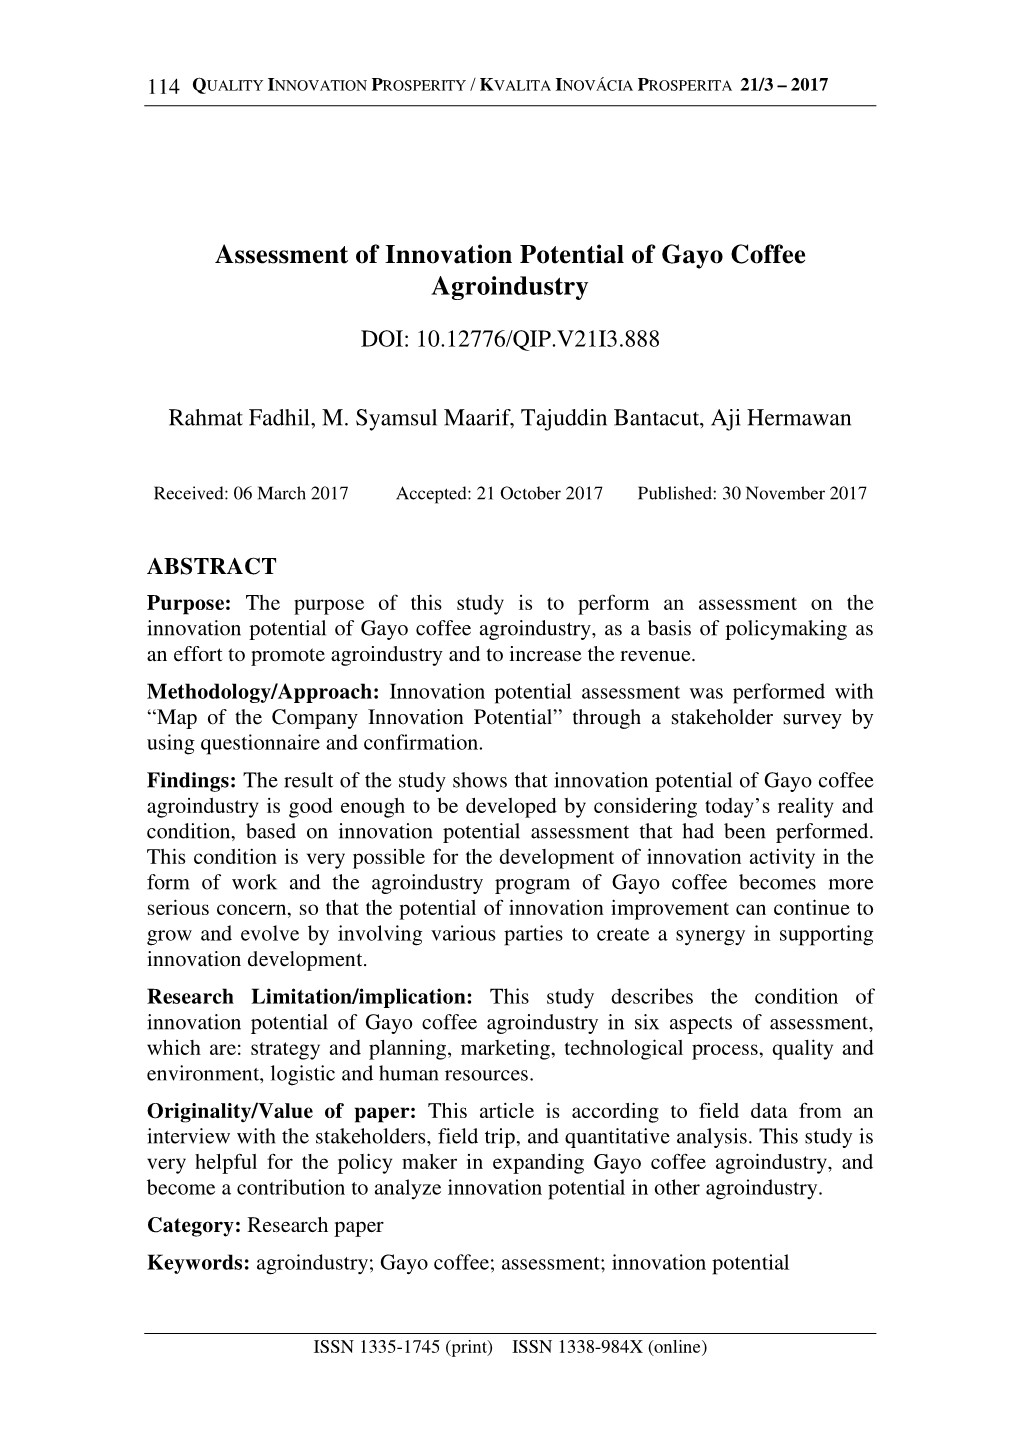 Assessment of Innovation Potential of Gayo Coffee Agroindustry